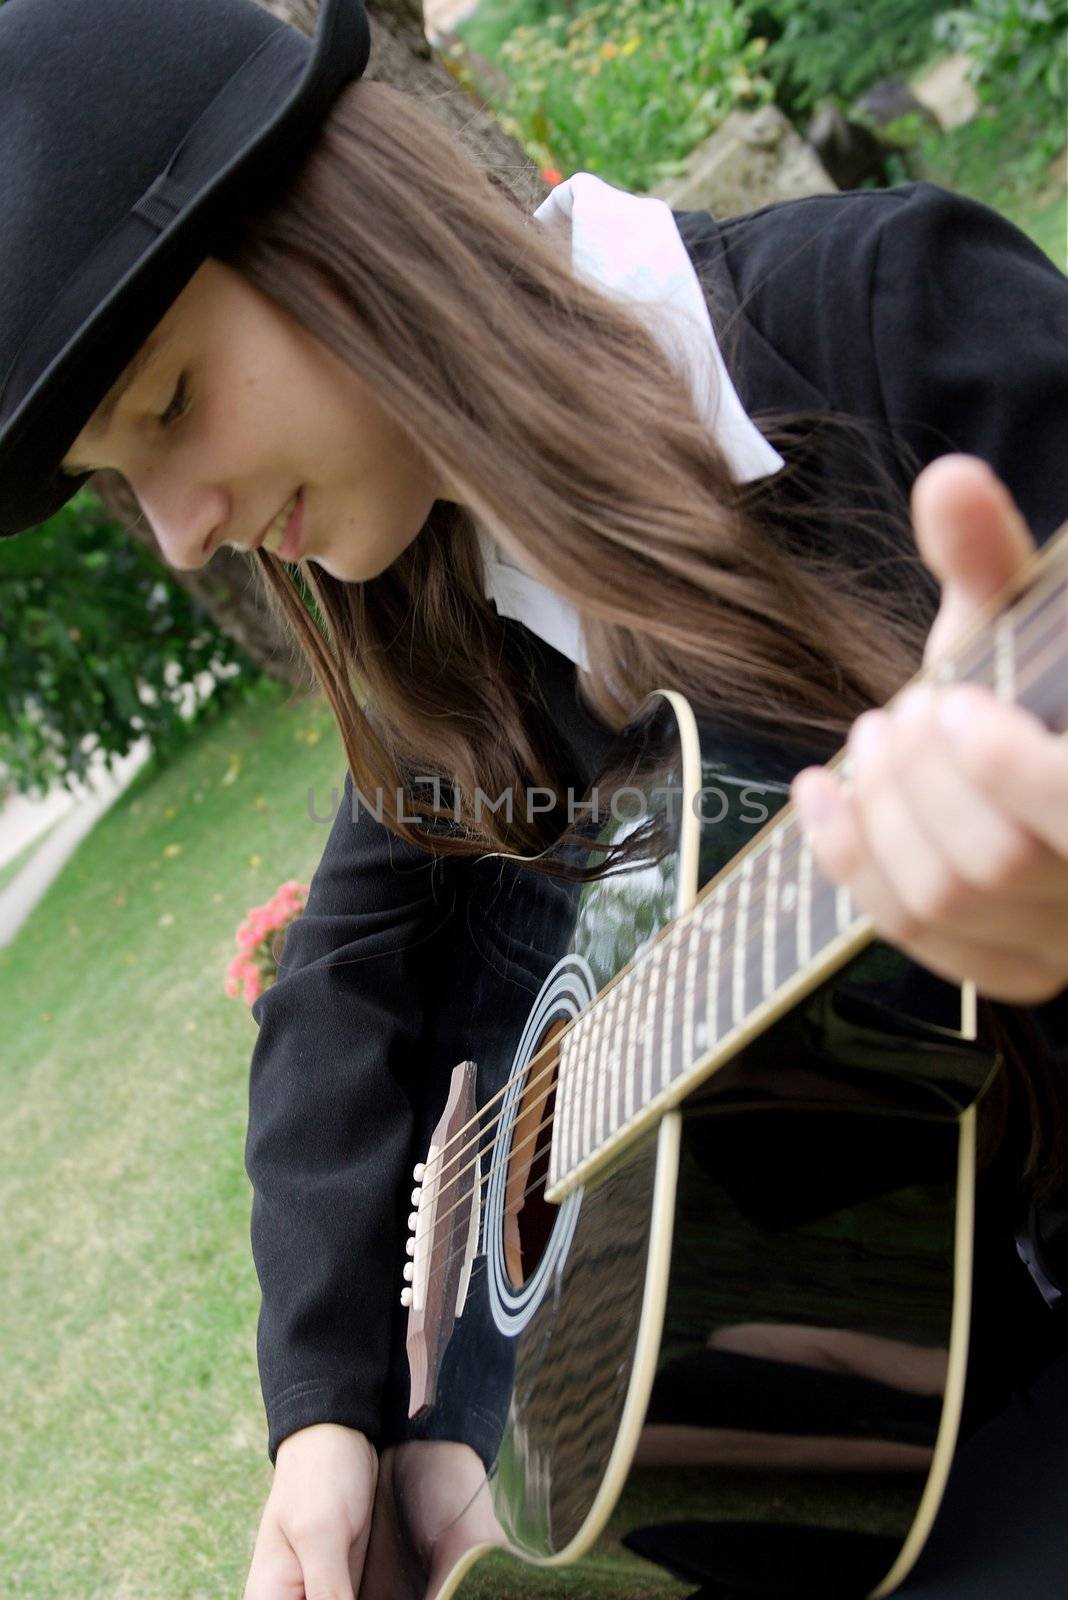 Girl playing acoustic guitar out in the grass